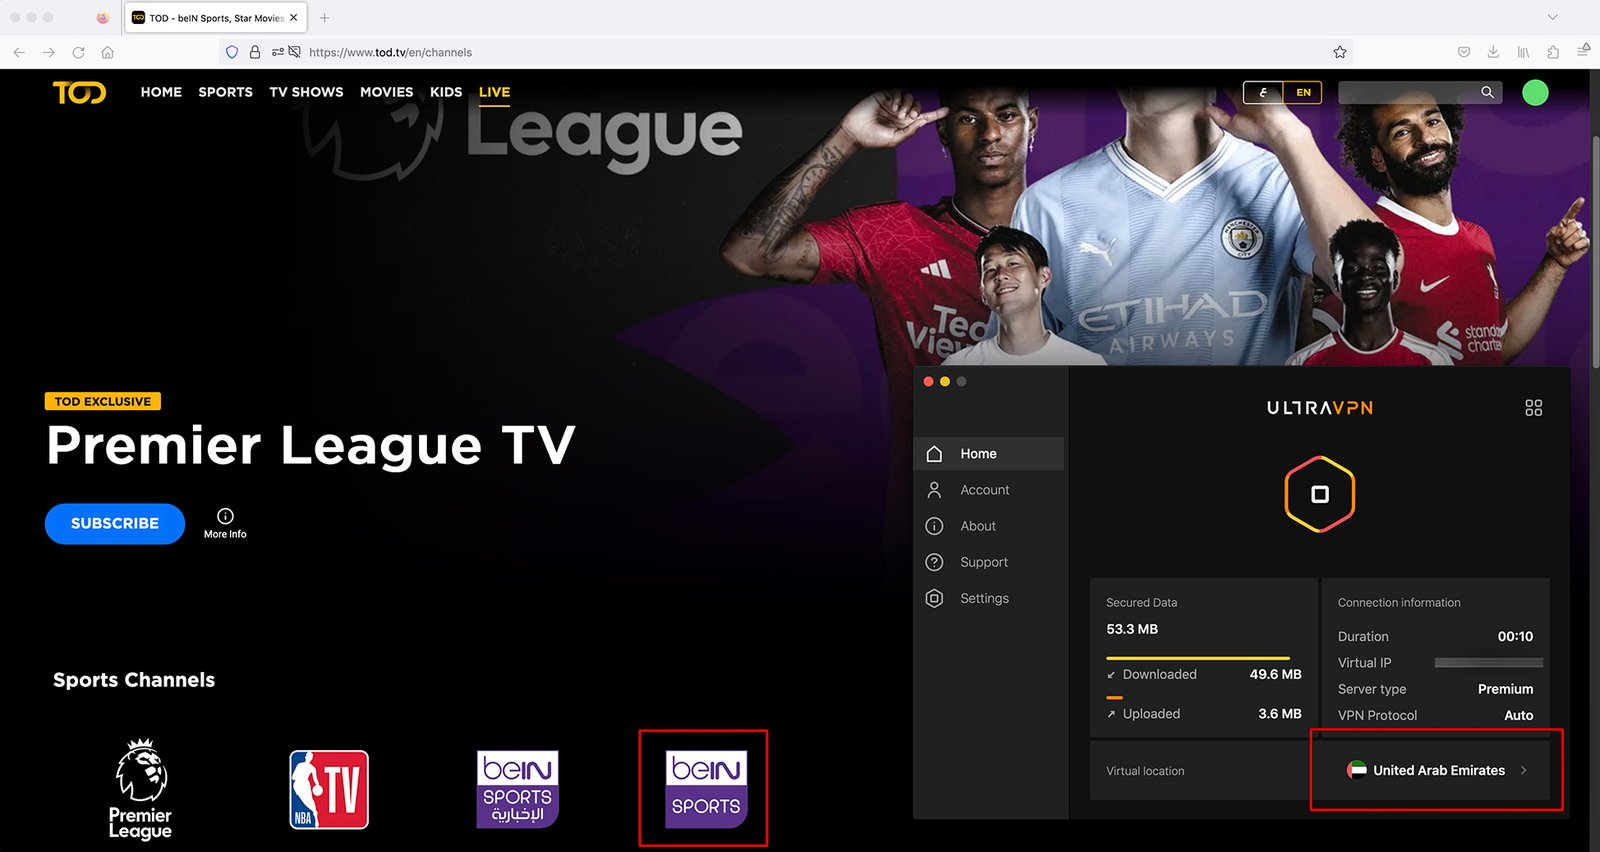 Watch TOD TV abroad - Streaming Free Live beIn Sports with UltraVPN - English Premier League